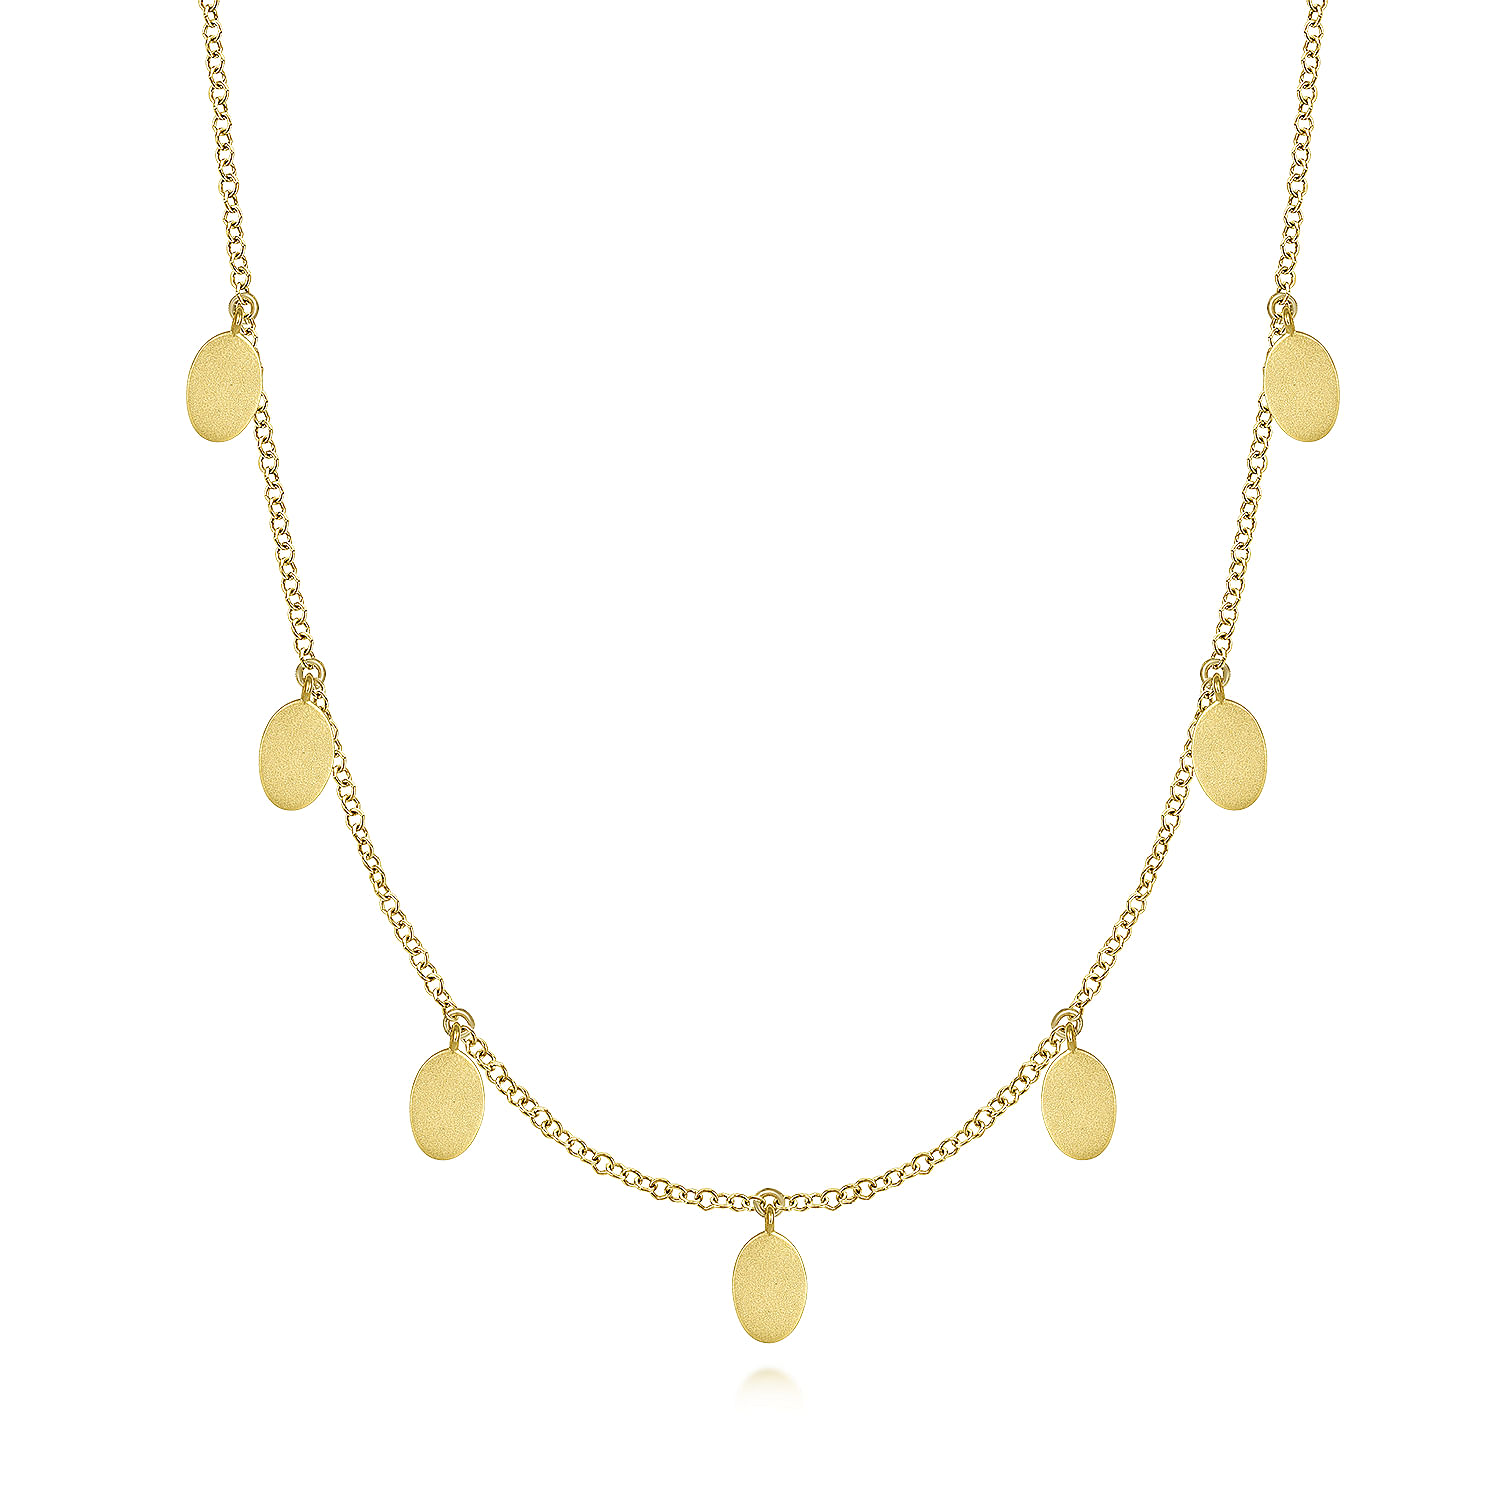 Gabriel - 24 inch 14K Yellow Gold Necklace with Oval Shape Drops